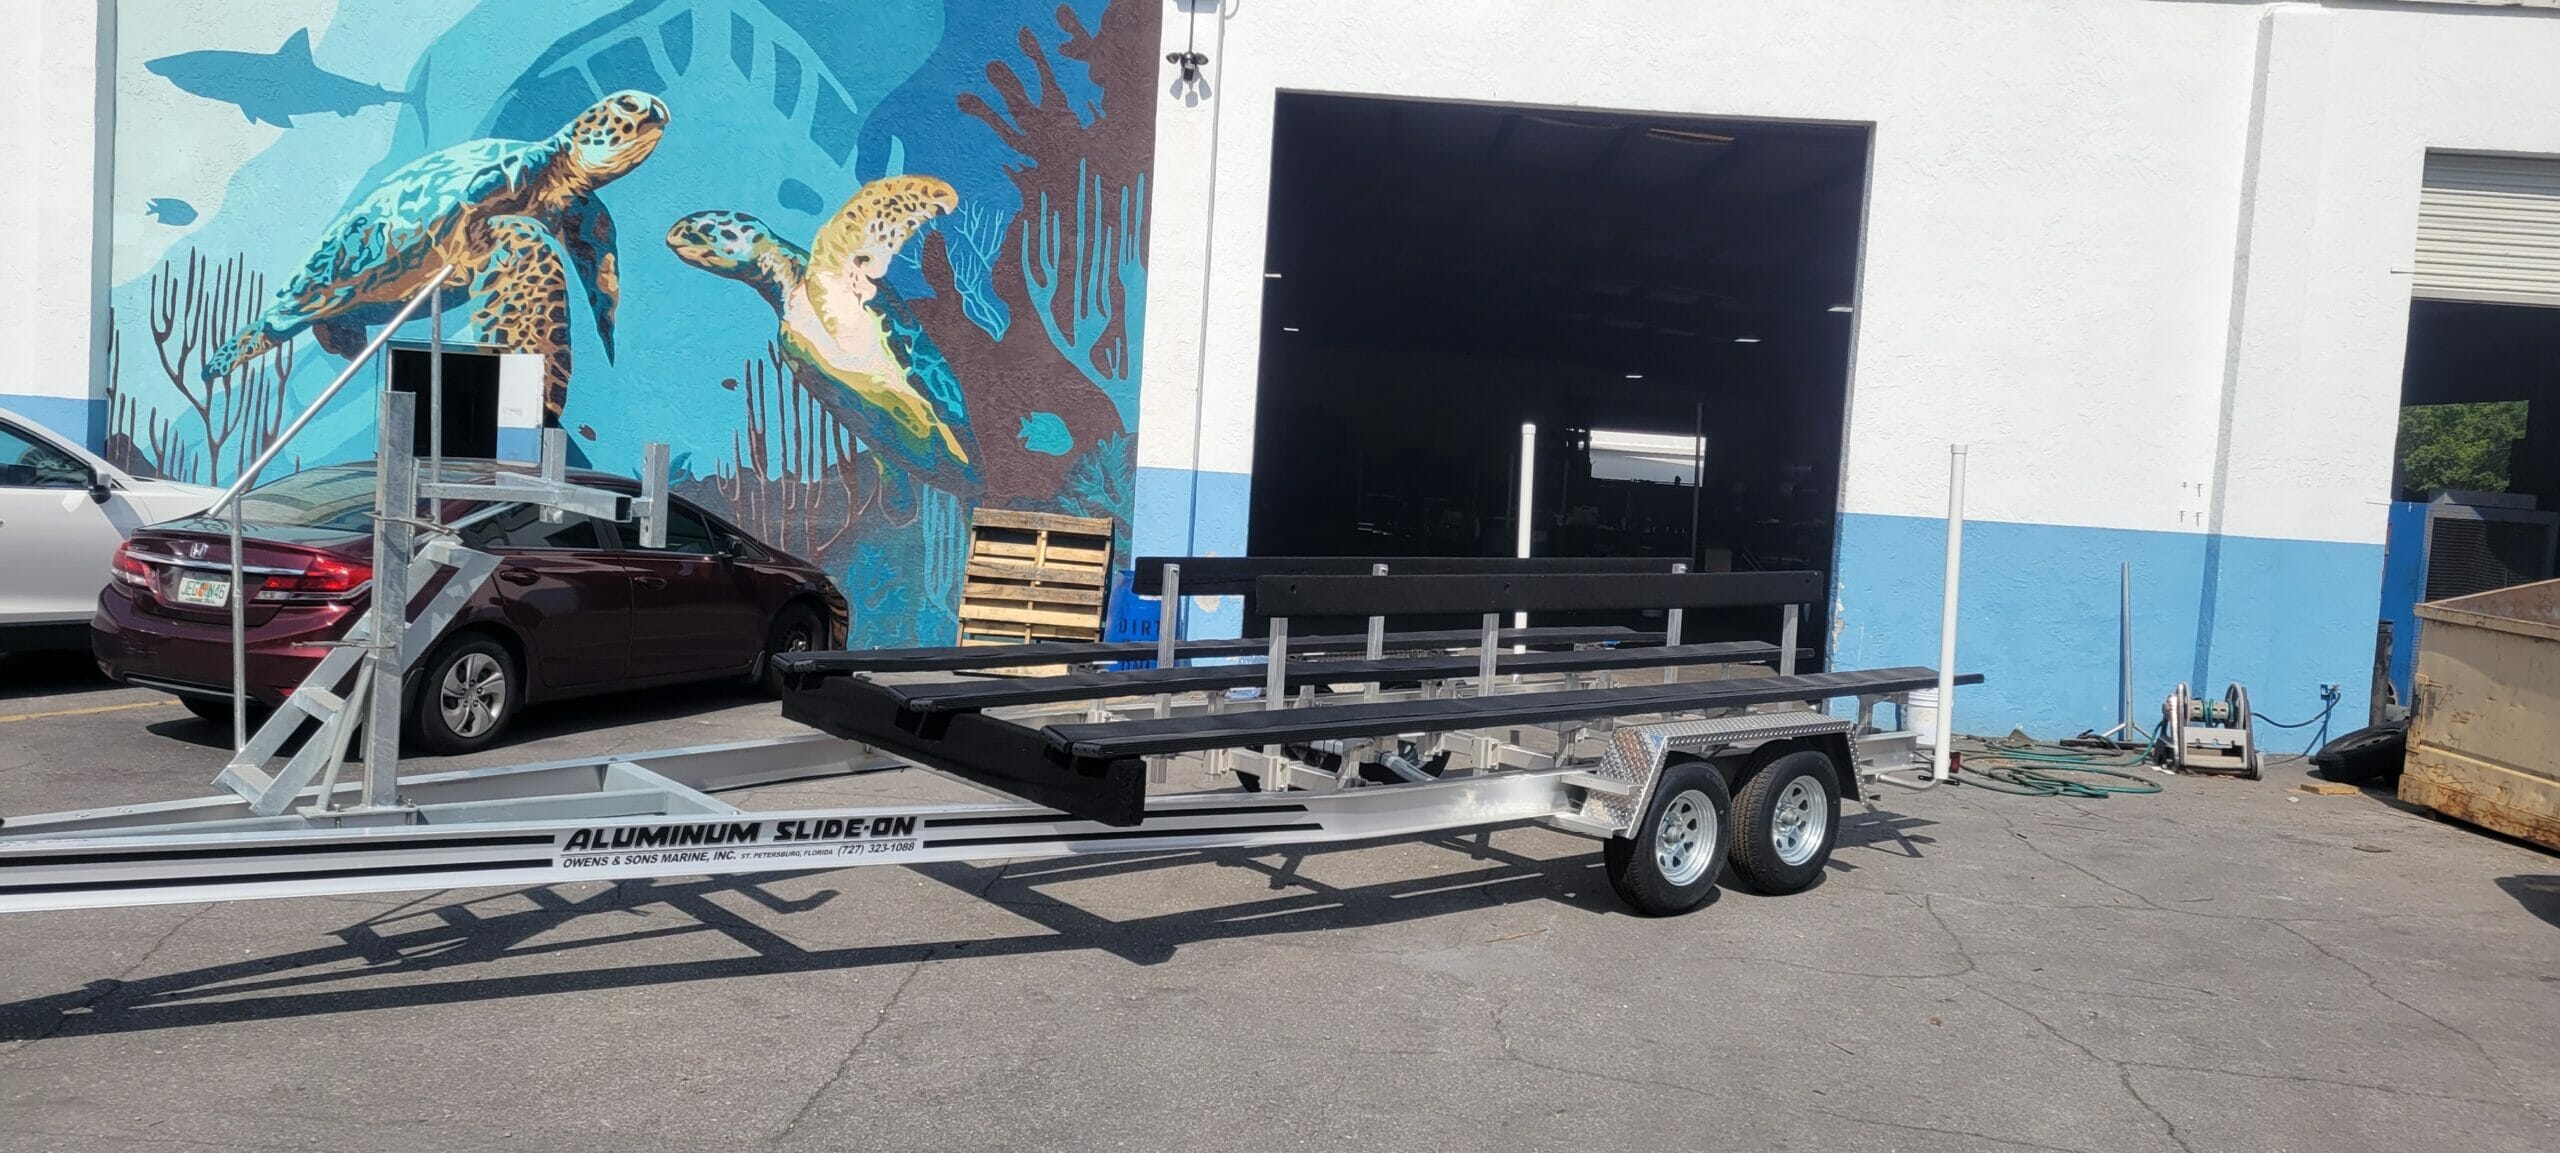 7000lb fully adjustable trailer for a pontoon or tri toon with ladder and bow stop